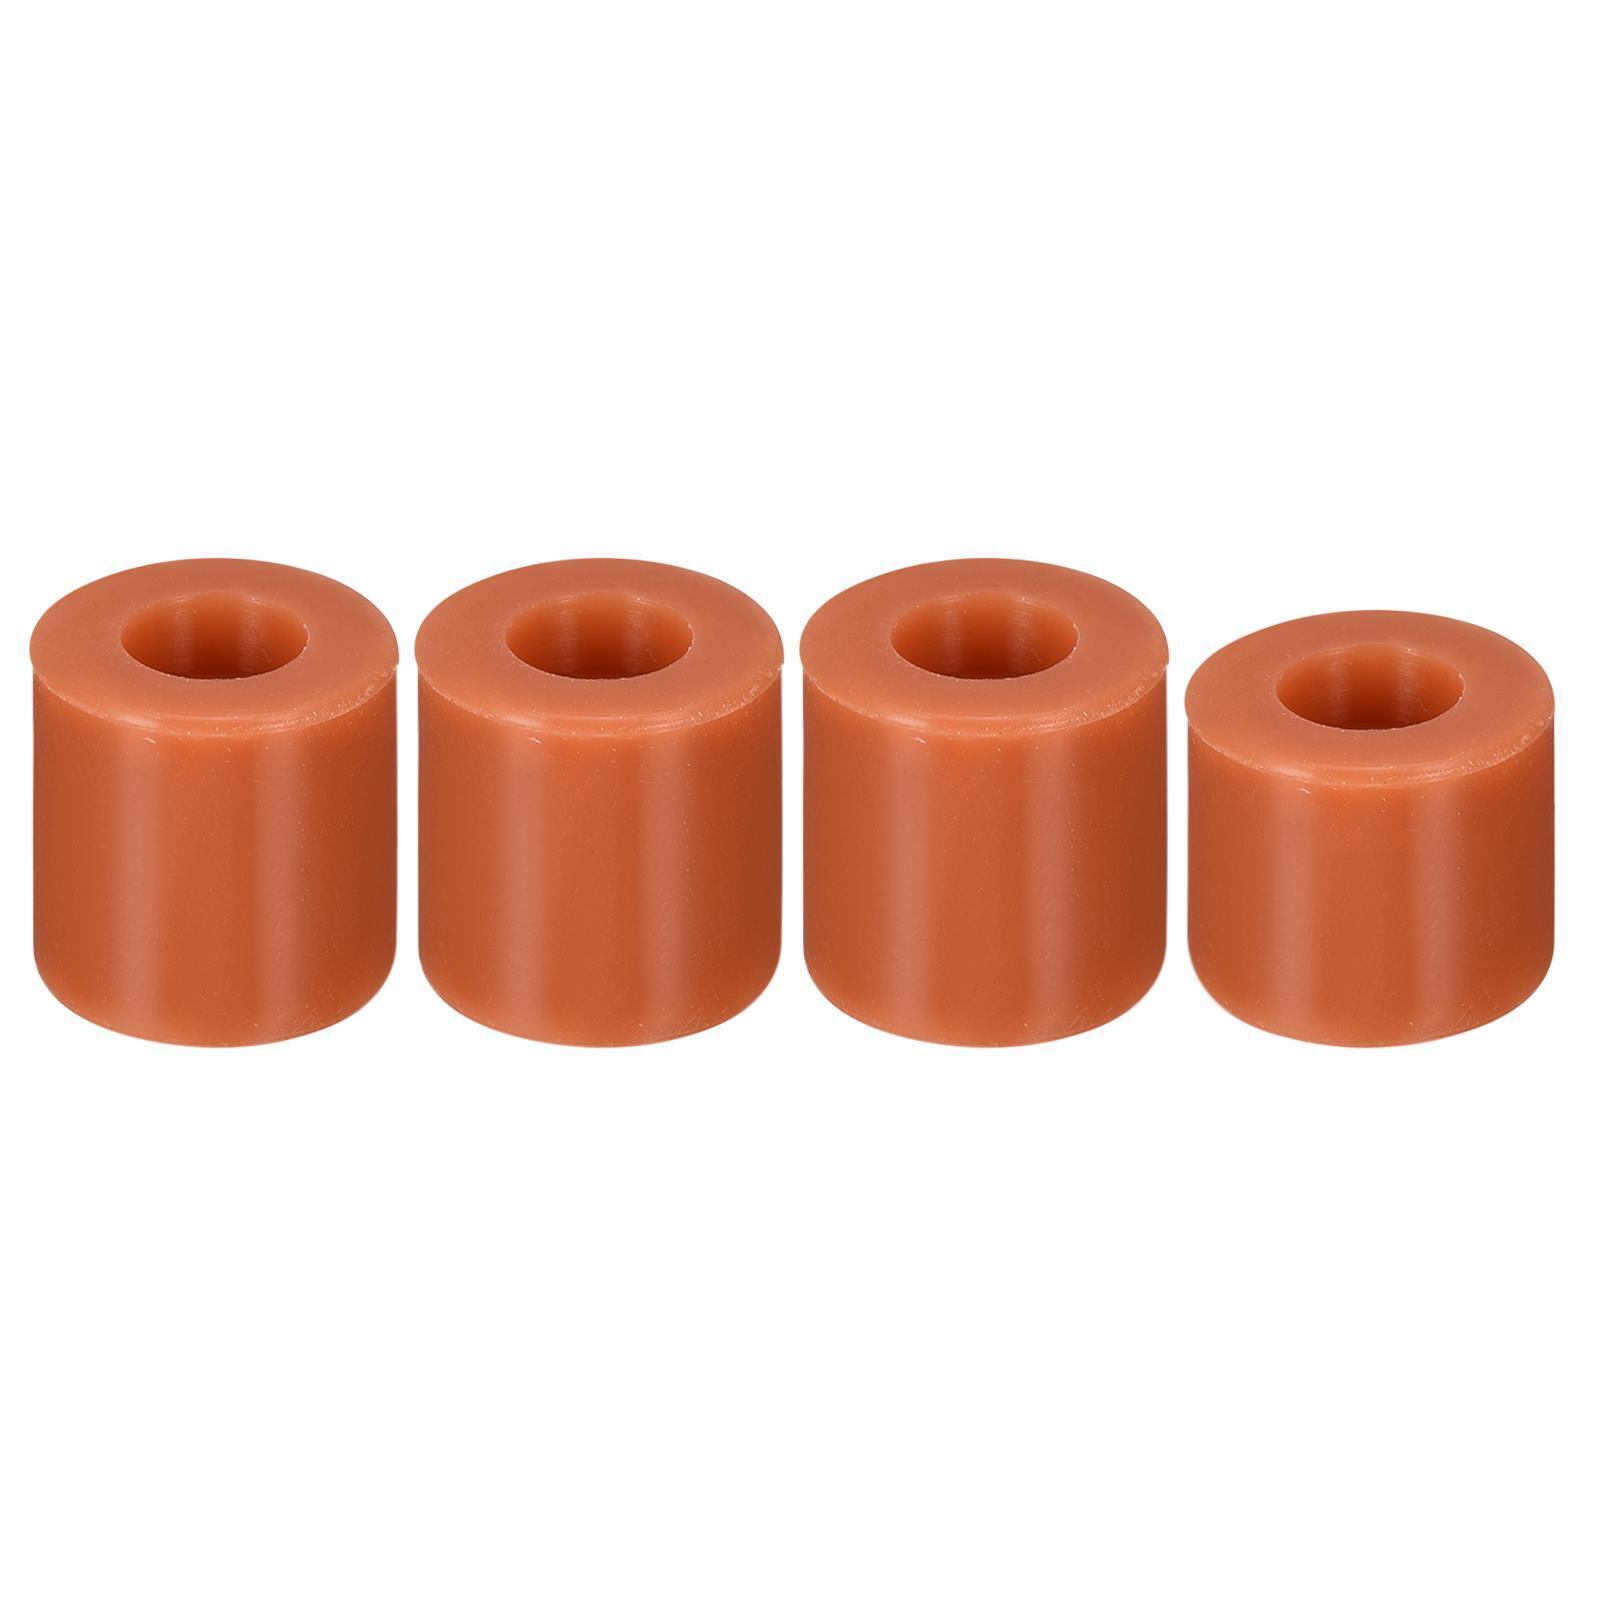 16mm/18mm 3D Printer Heat Bed Parts, Silicone Solid Bed Mounts,Brown 1set